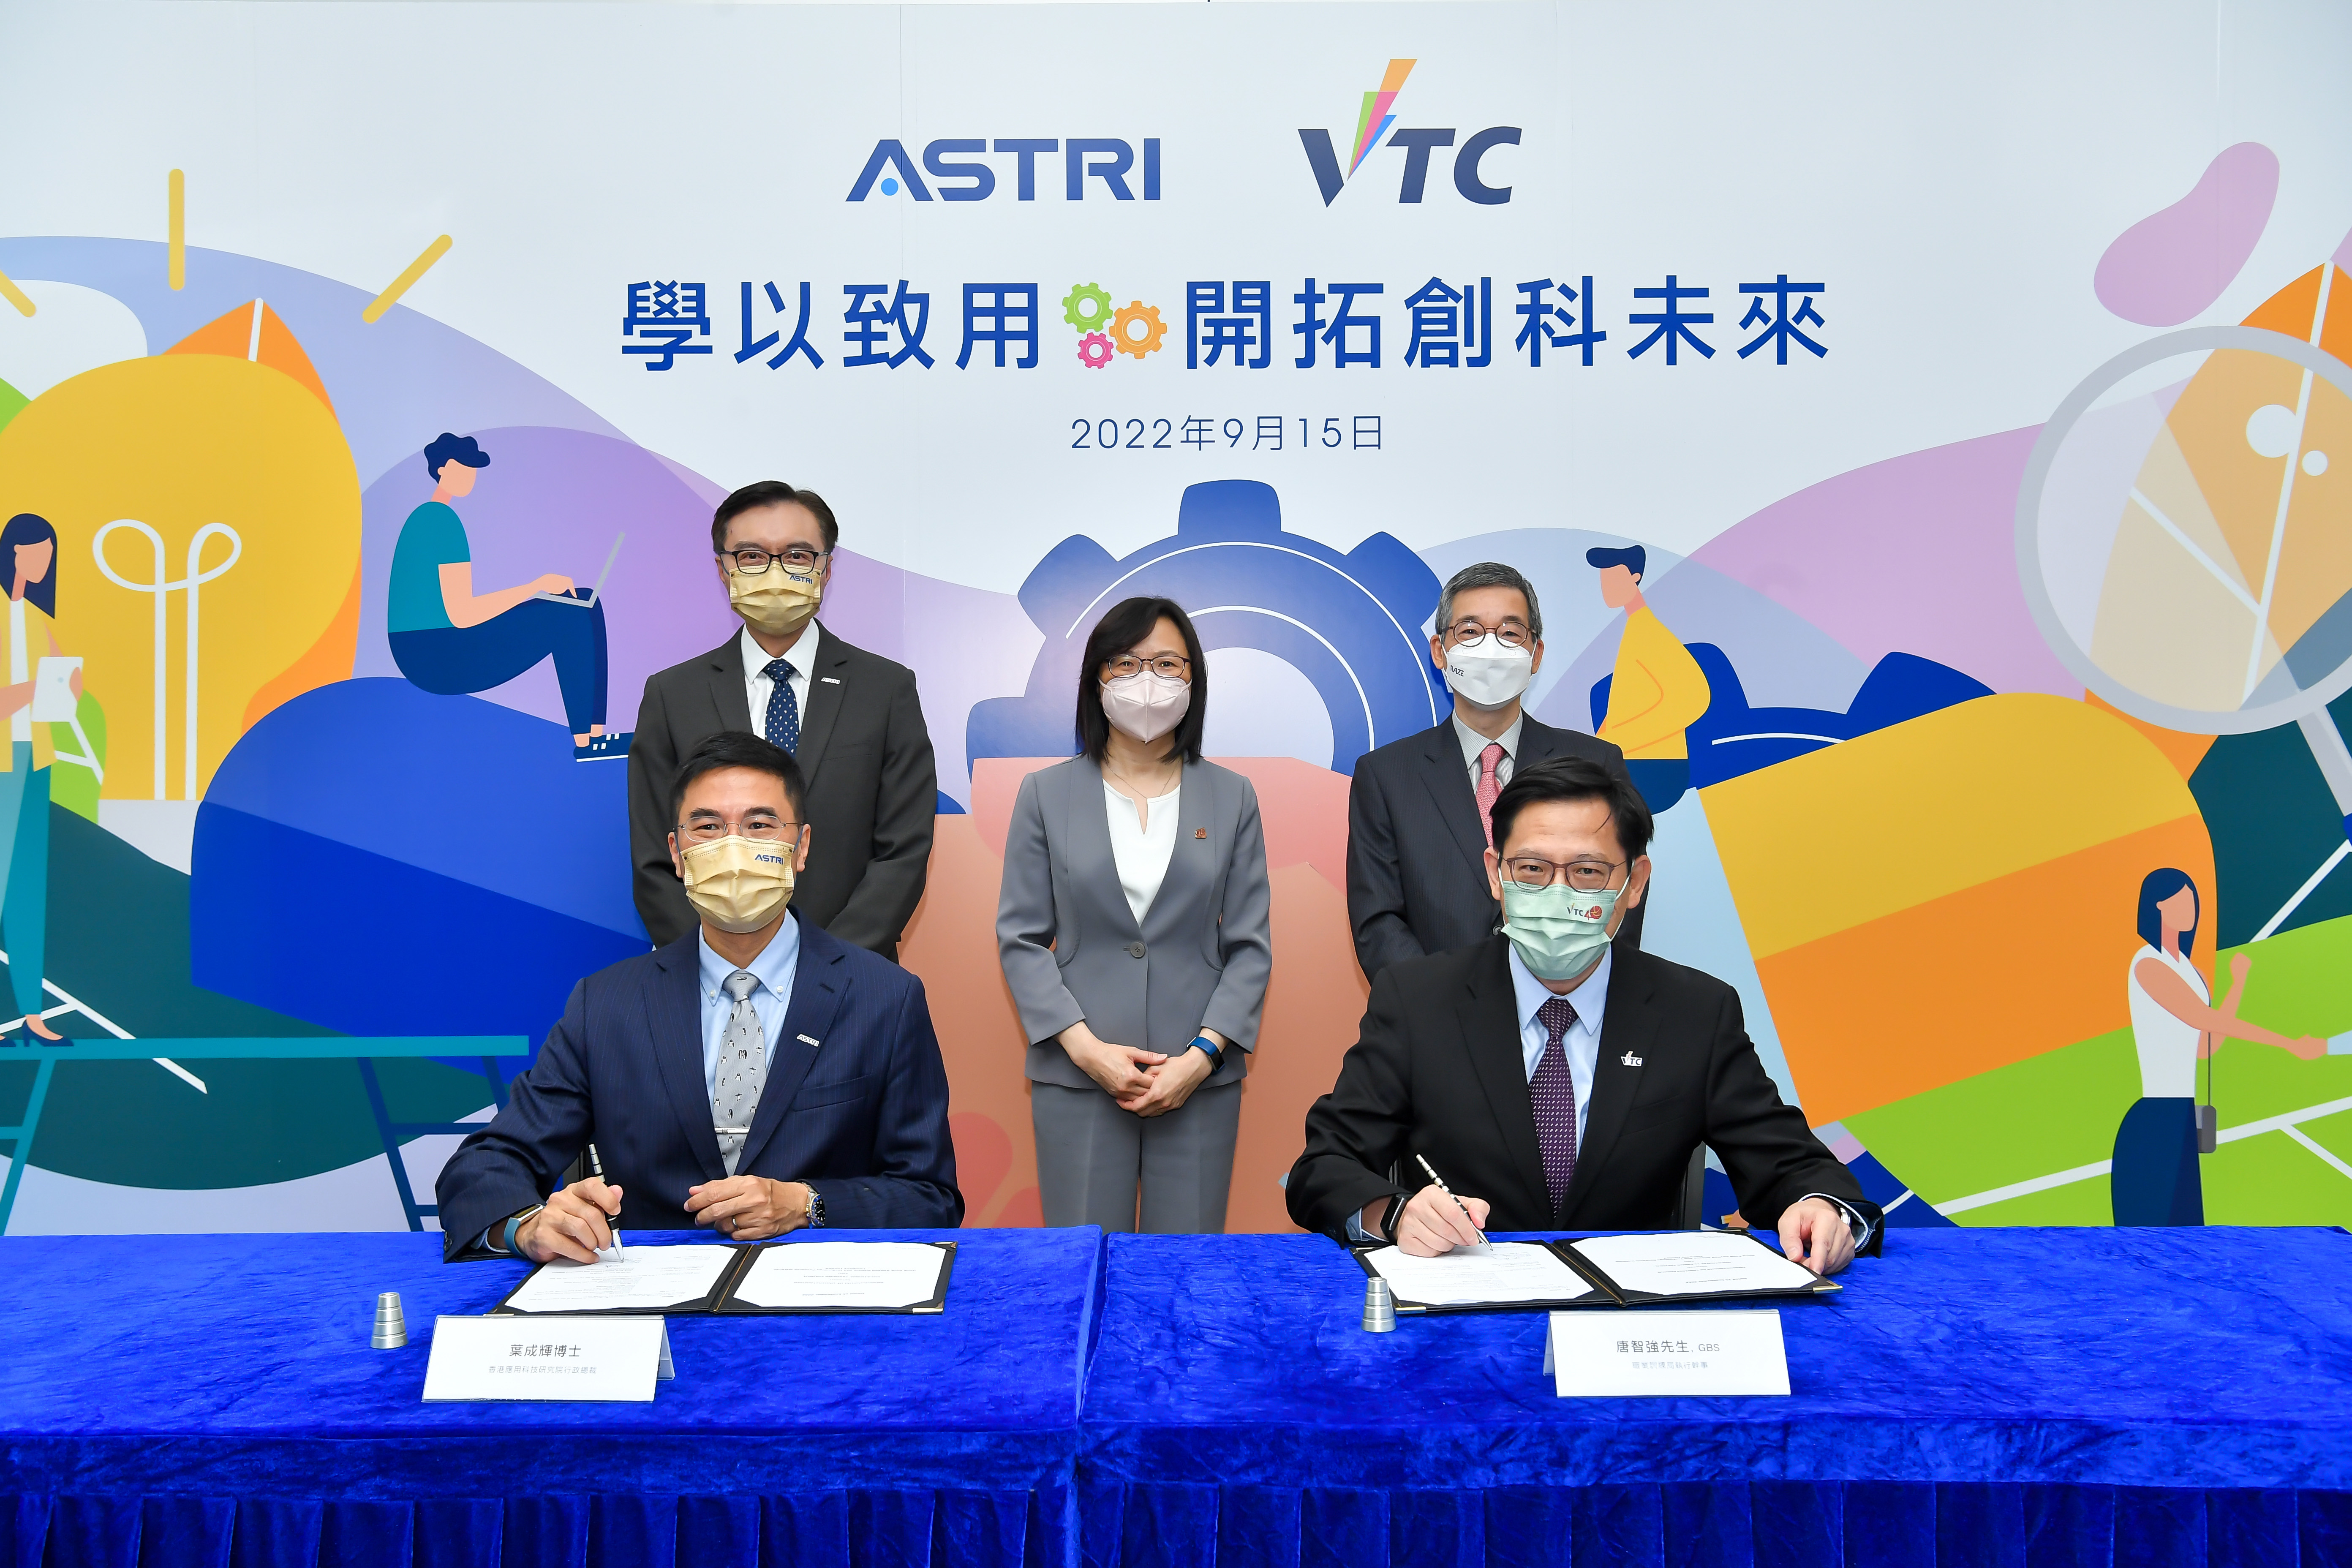 [News from Institutions] ASTRI partners with VTC to groom young R&D talents and launch new programmes on Microelectronics and Communications Technologies